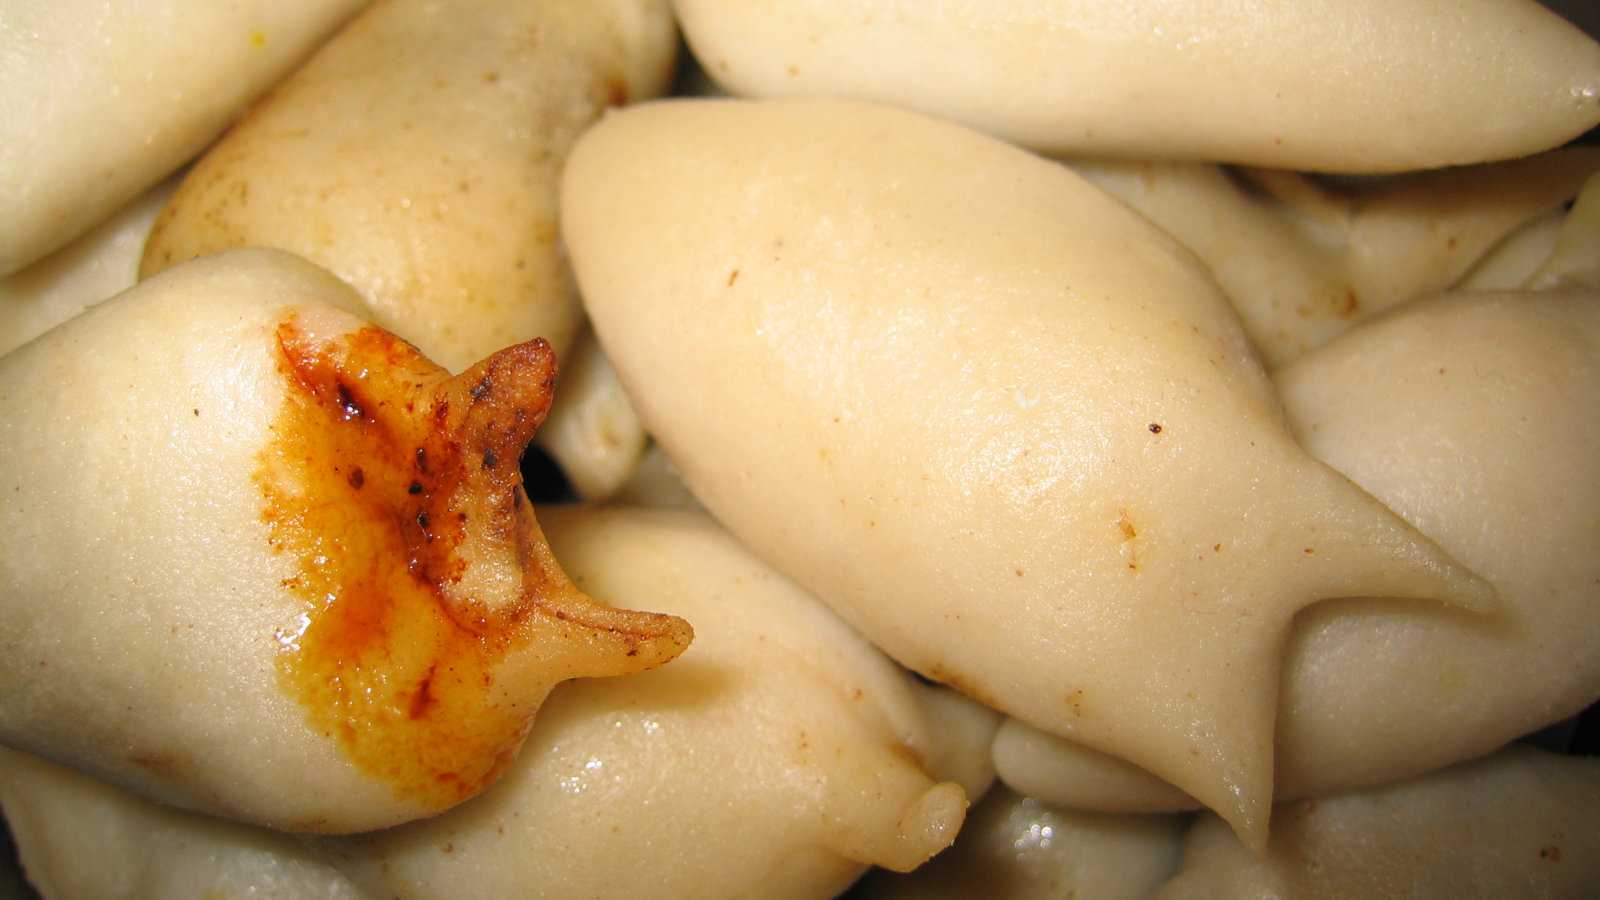 We love yomari, one of the best traditional foods from Nepal